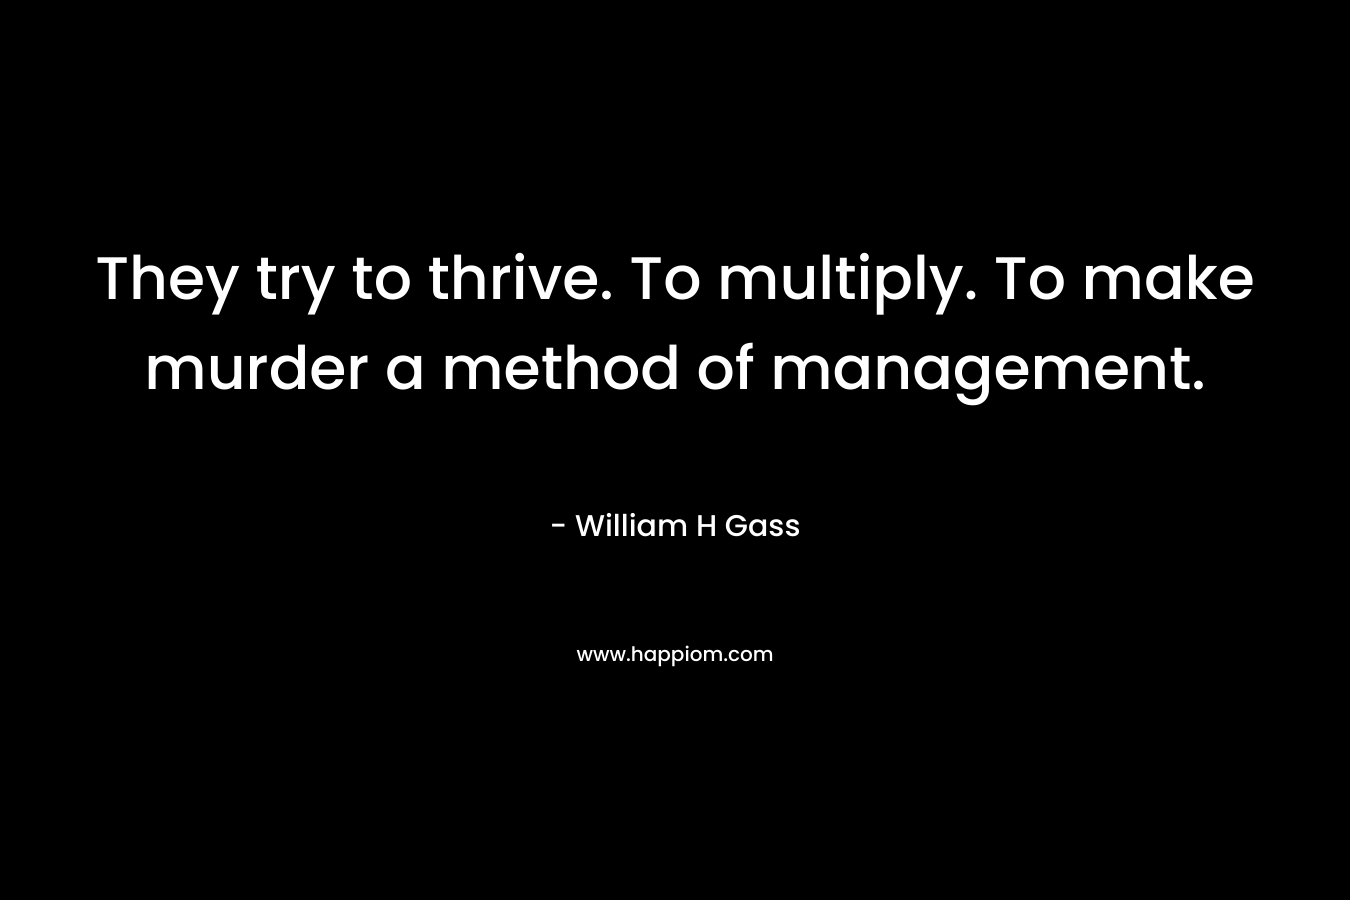 They try to thrive. To multiply. To make murder a method of management. – William H Gass